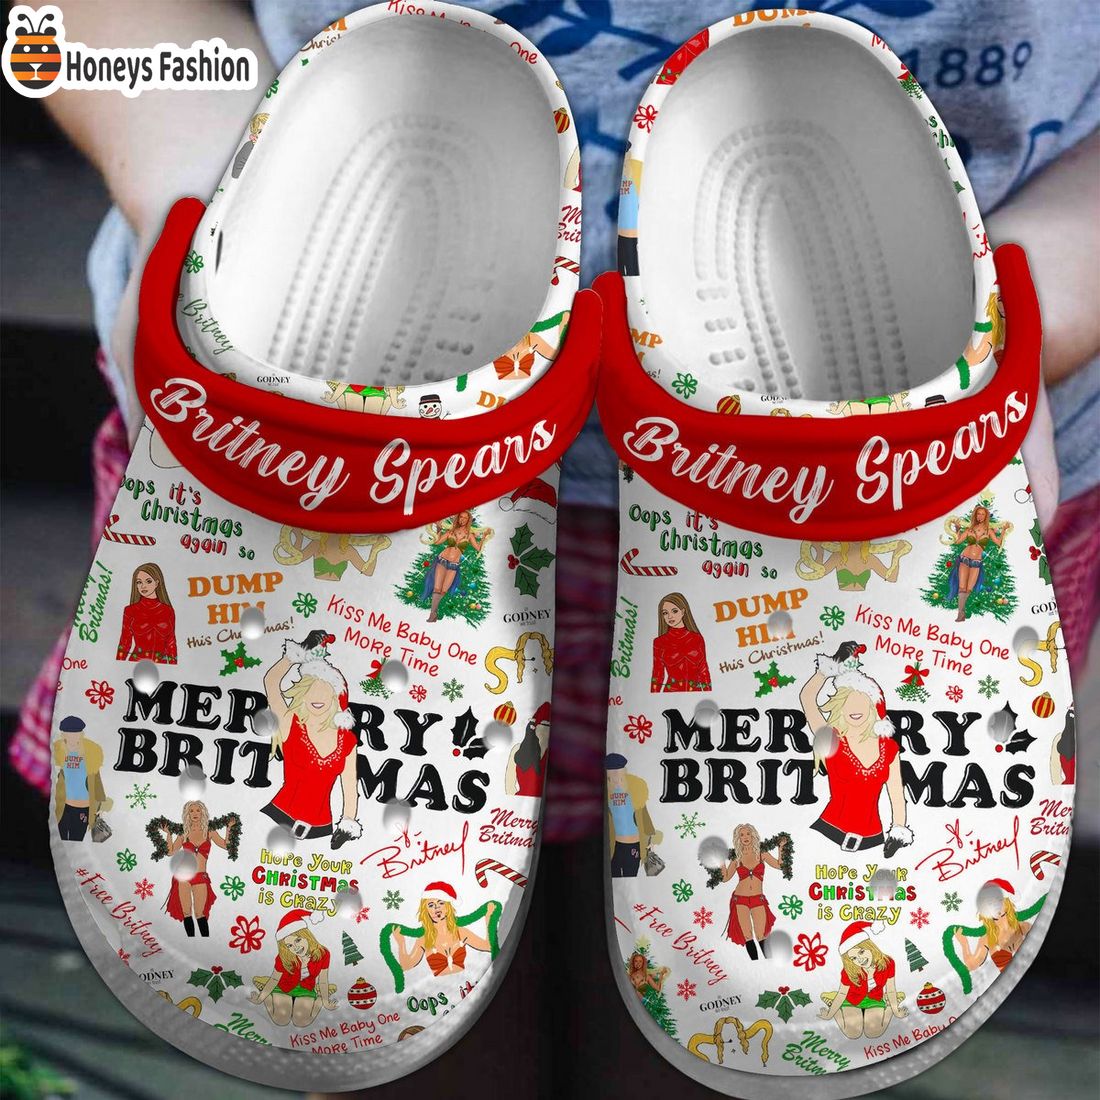 Britney Spears Merry Britmas Crocs Clog Shoes